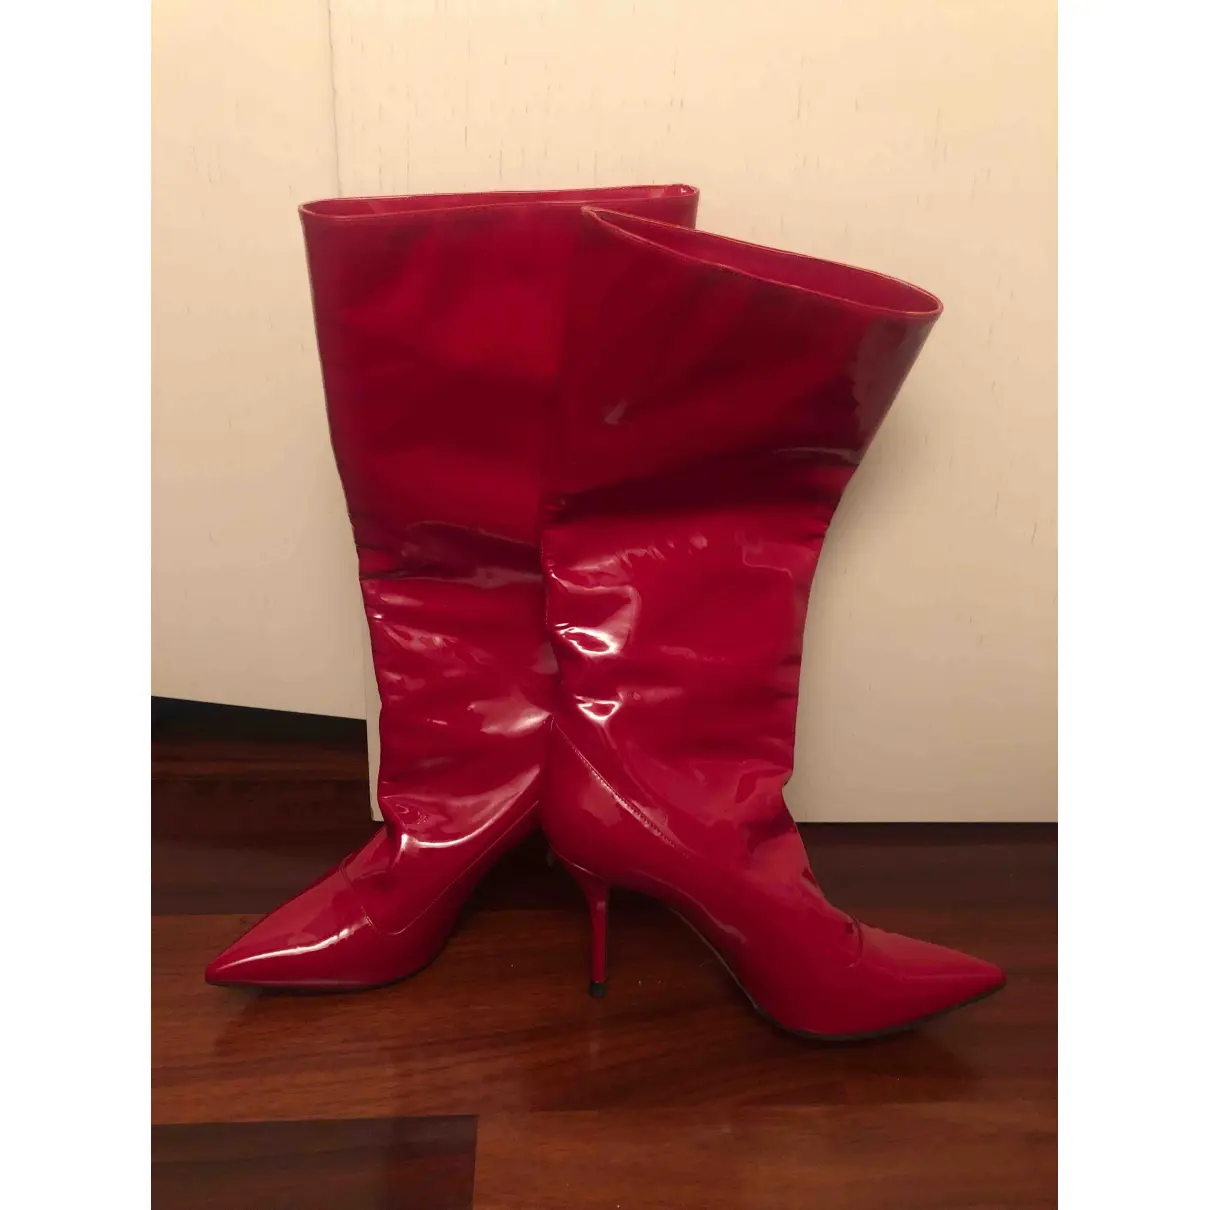 Buy Paul Andrew Patent leather boots online